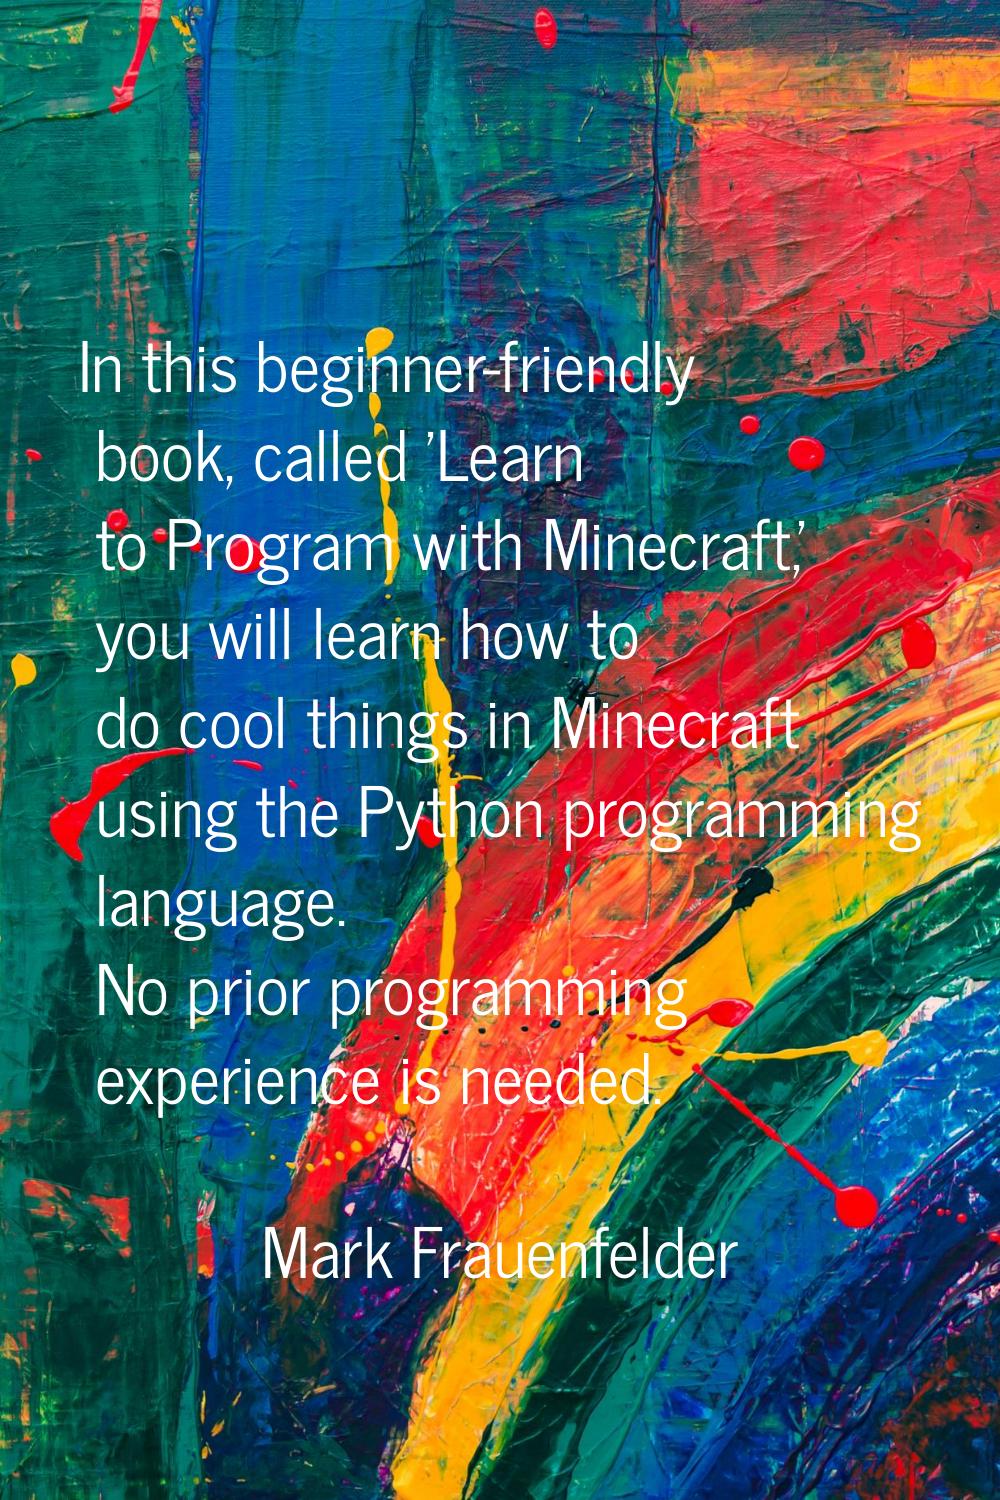 In this beginner-friendly book, called 'Learn to Program with Minecraft,' you will learn how to do 